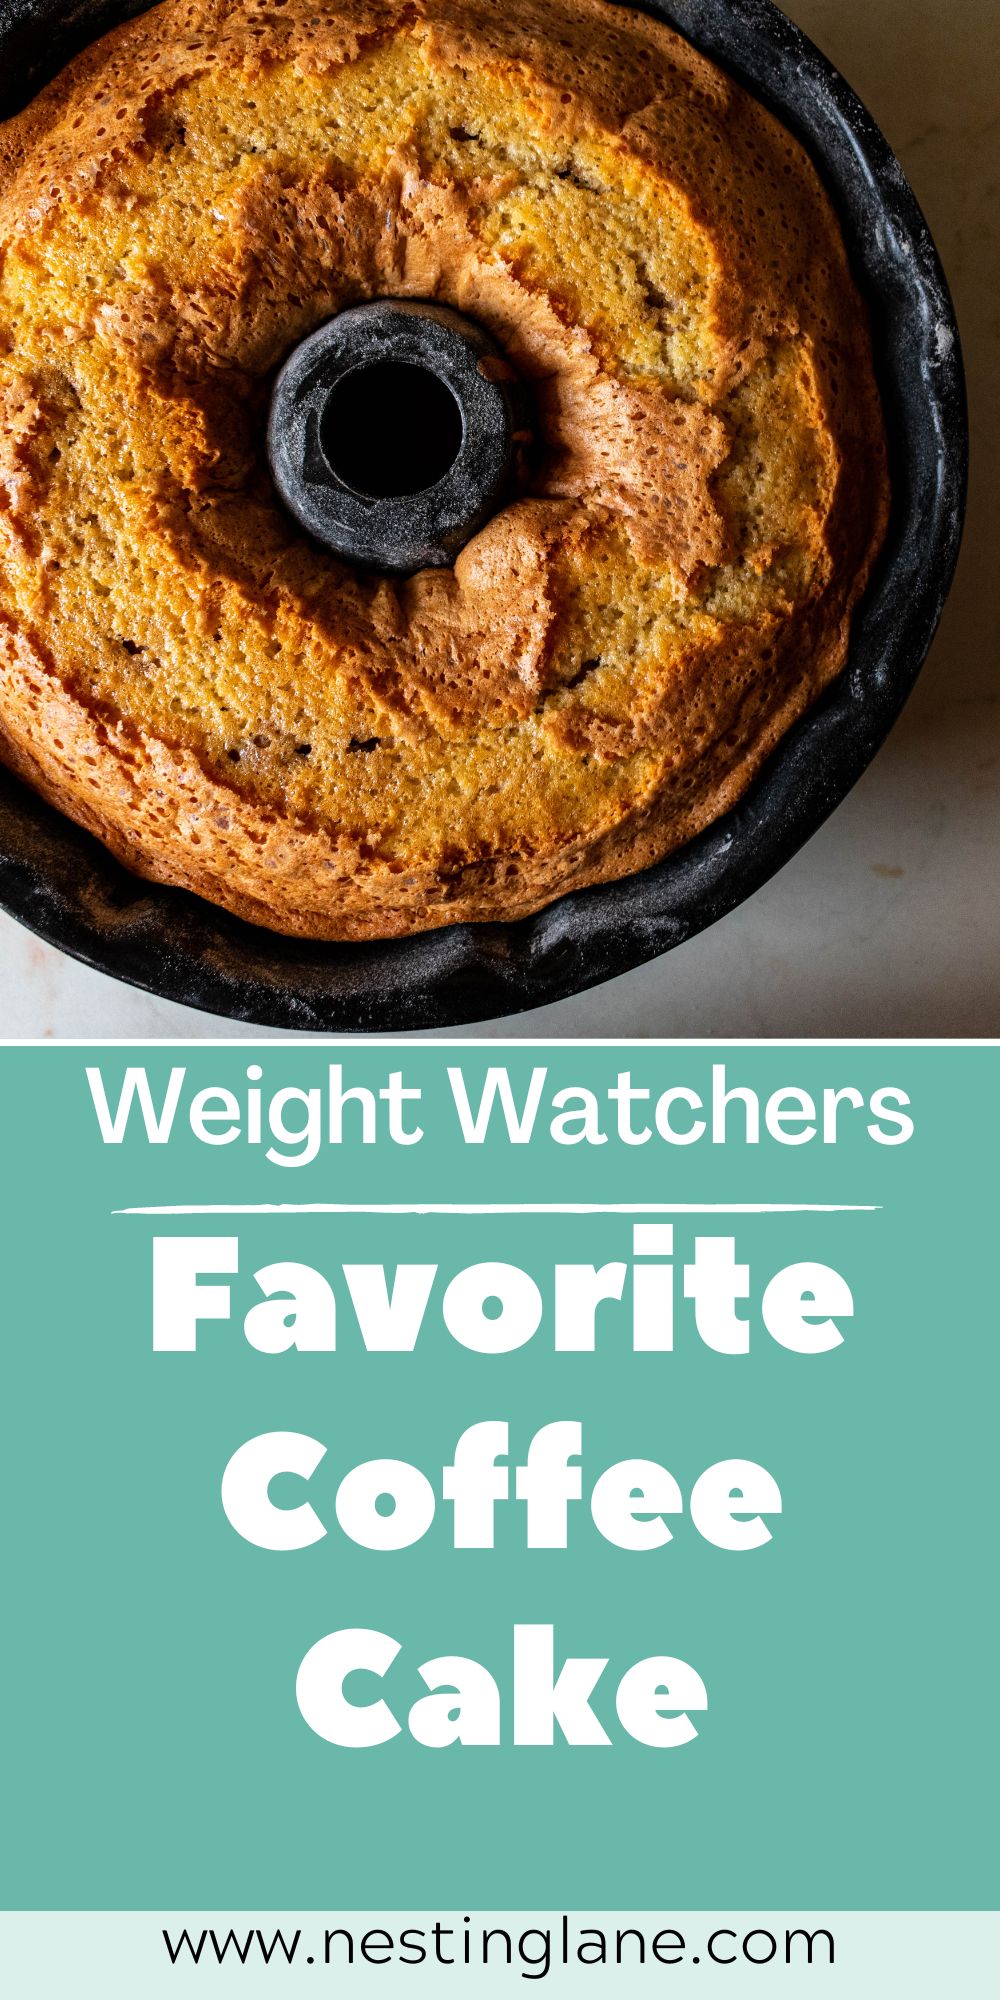 Graphic for Pinterest of Weight Watchers Favorite Coffee Cake Recipe with a teal background.